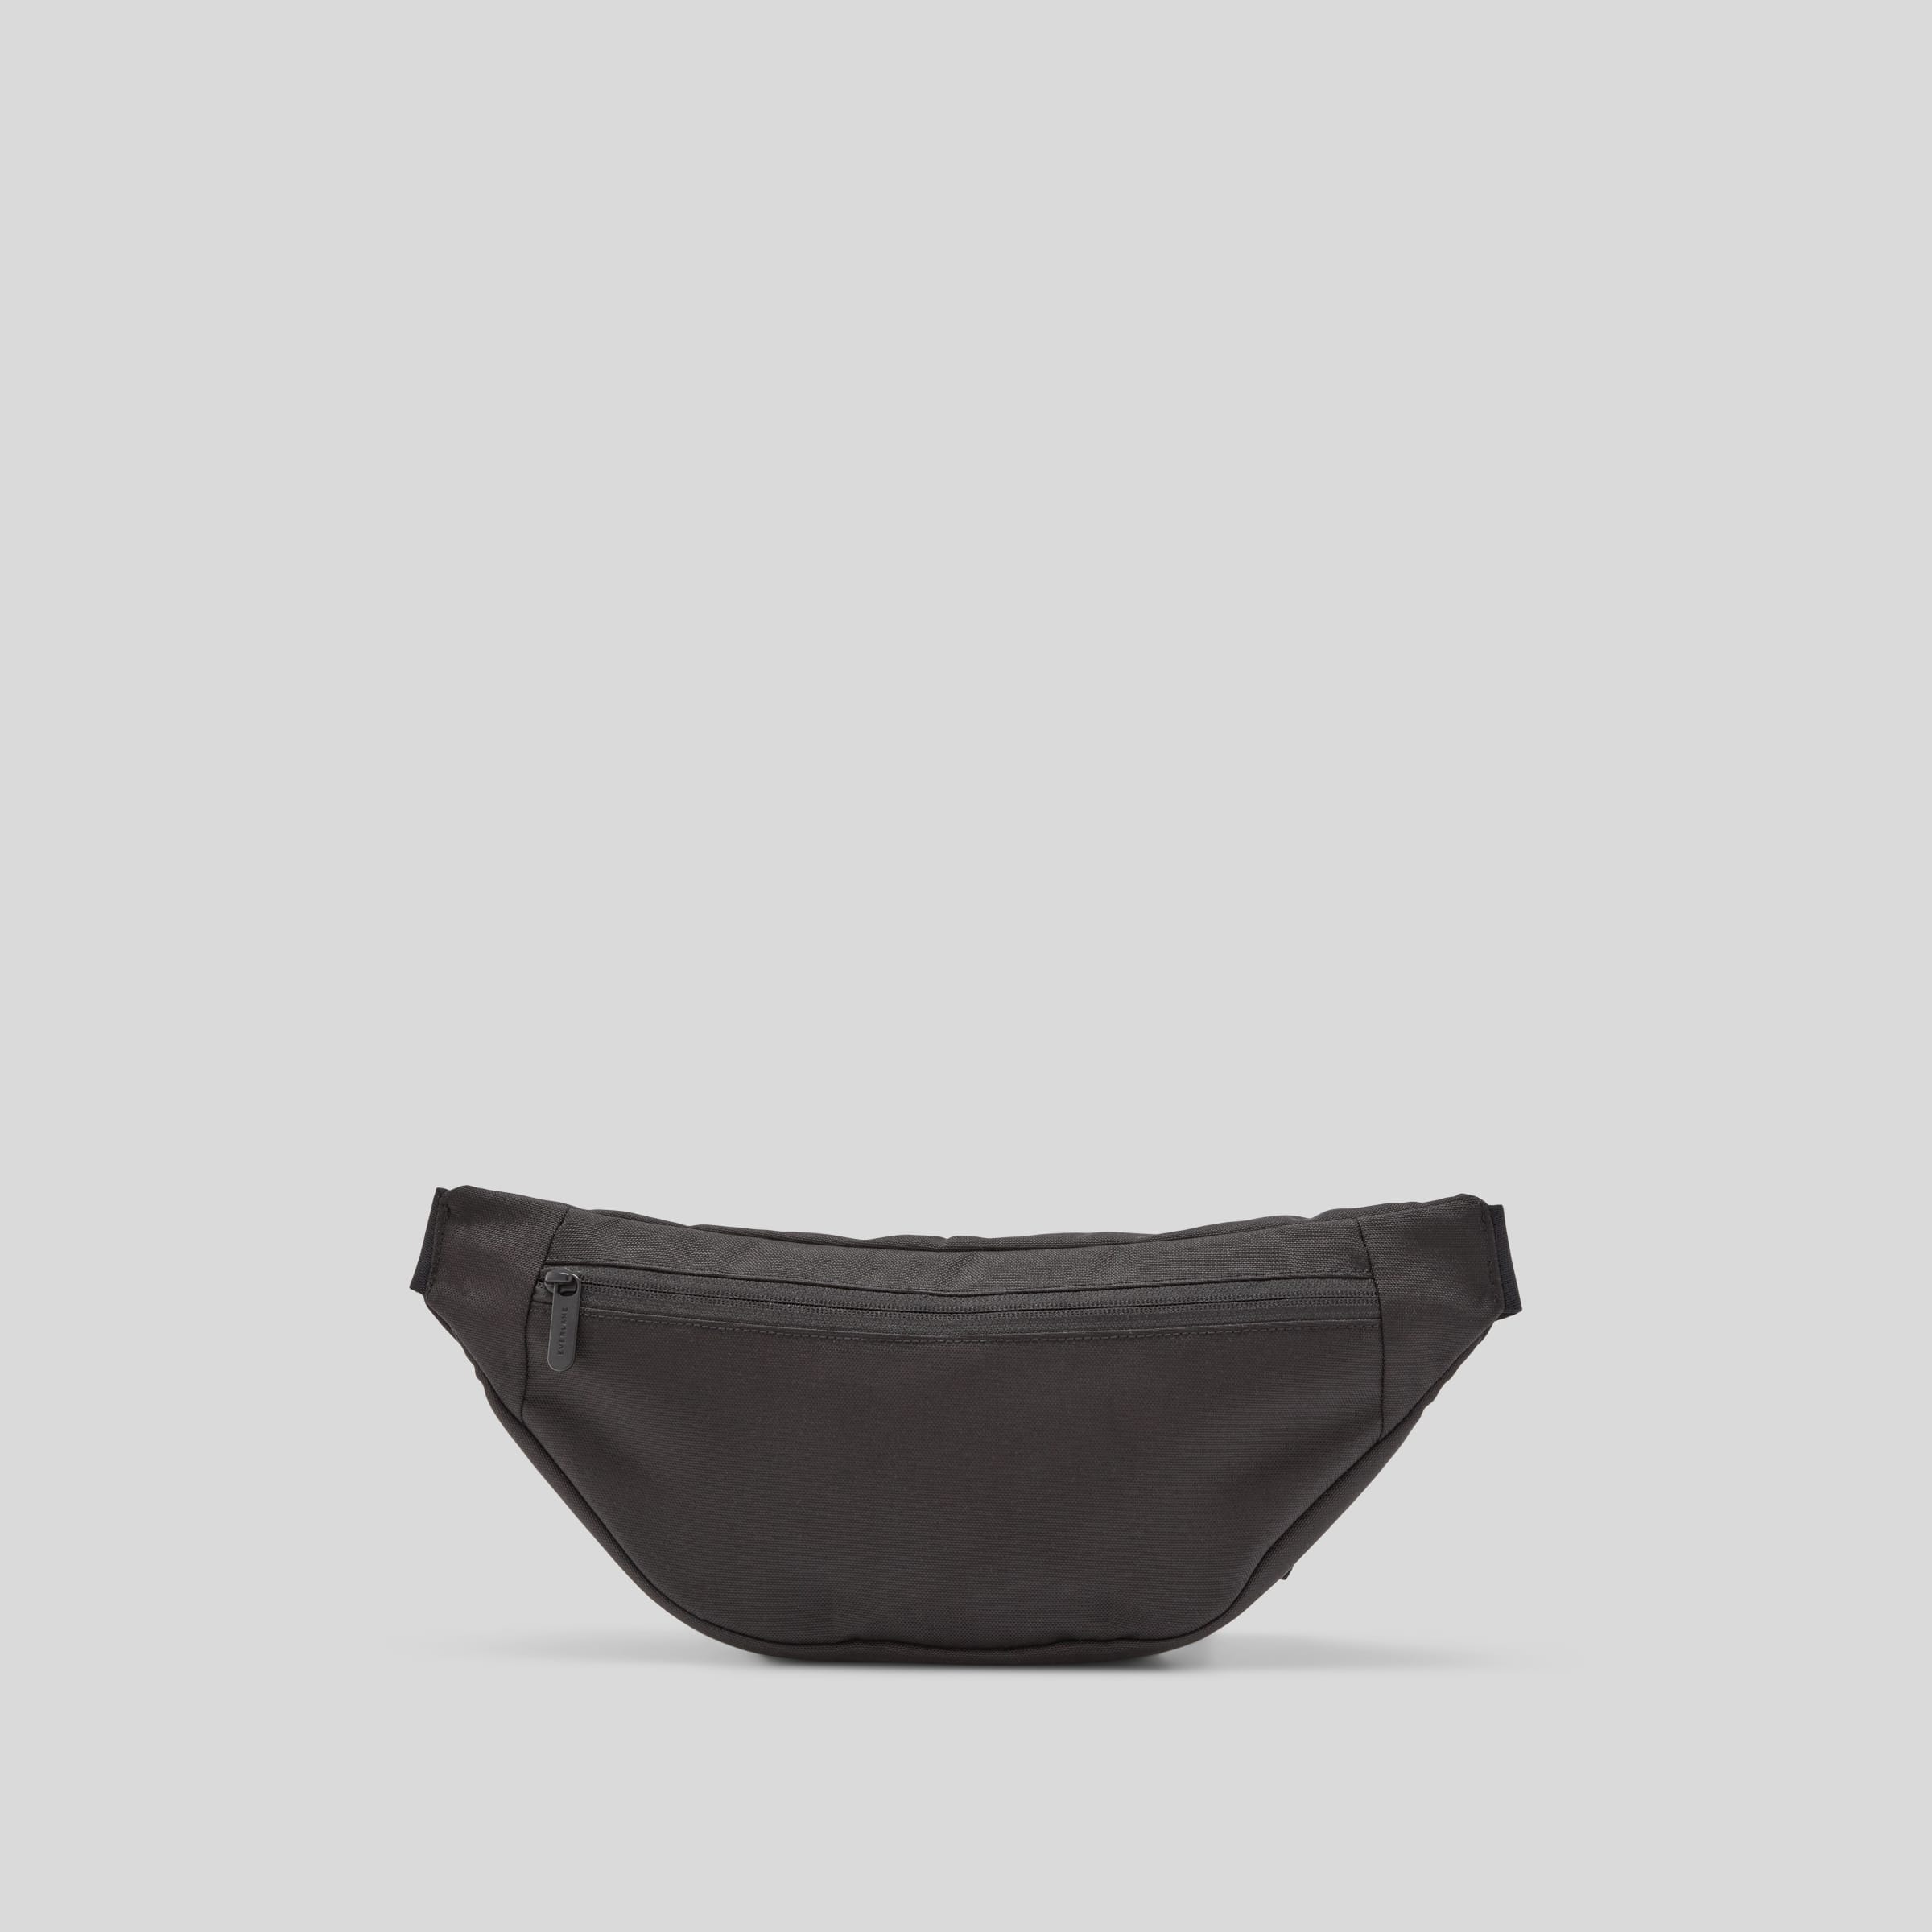 The Renew Transit Fanny Pack Black (with label) – Everlane